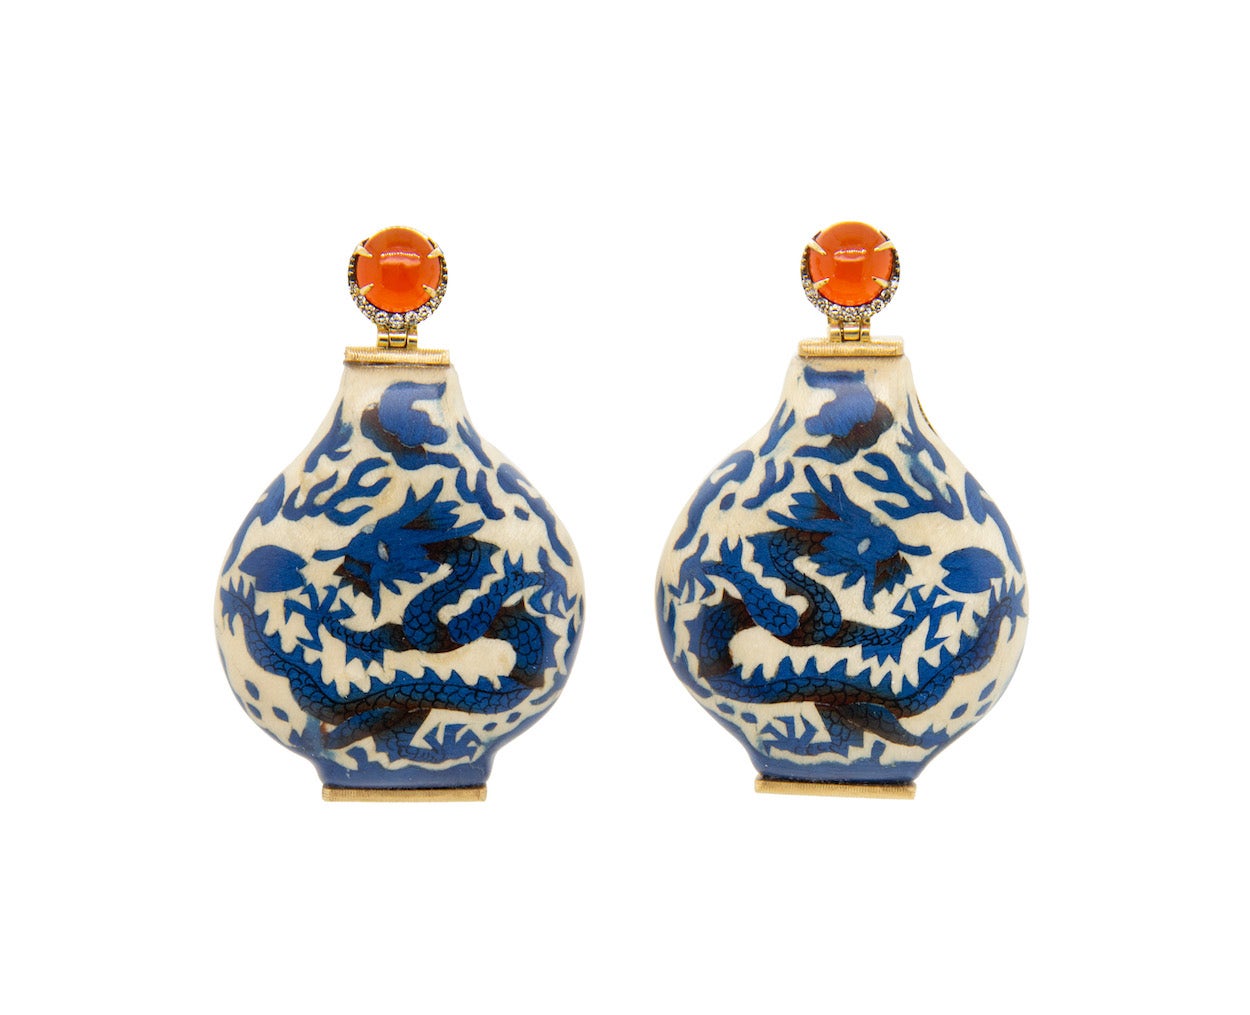 Silvia Furmanovich marquetry earrings set in 18K gold with diamonds and fire opal